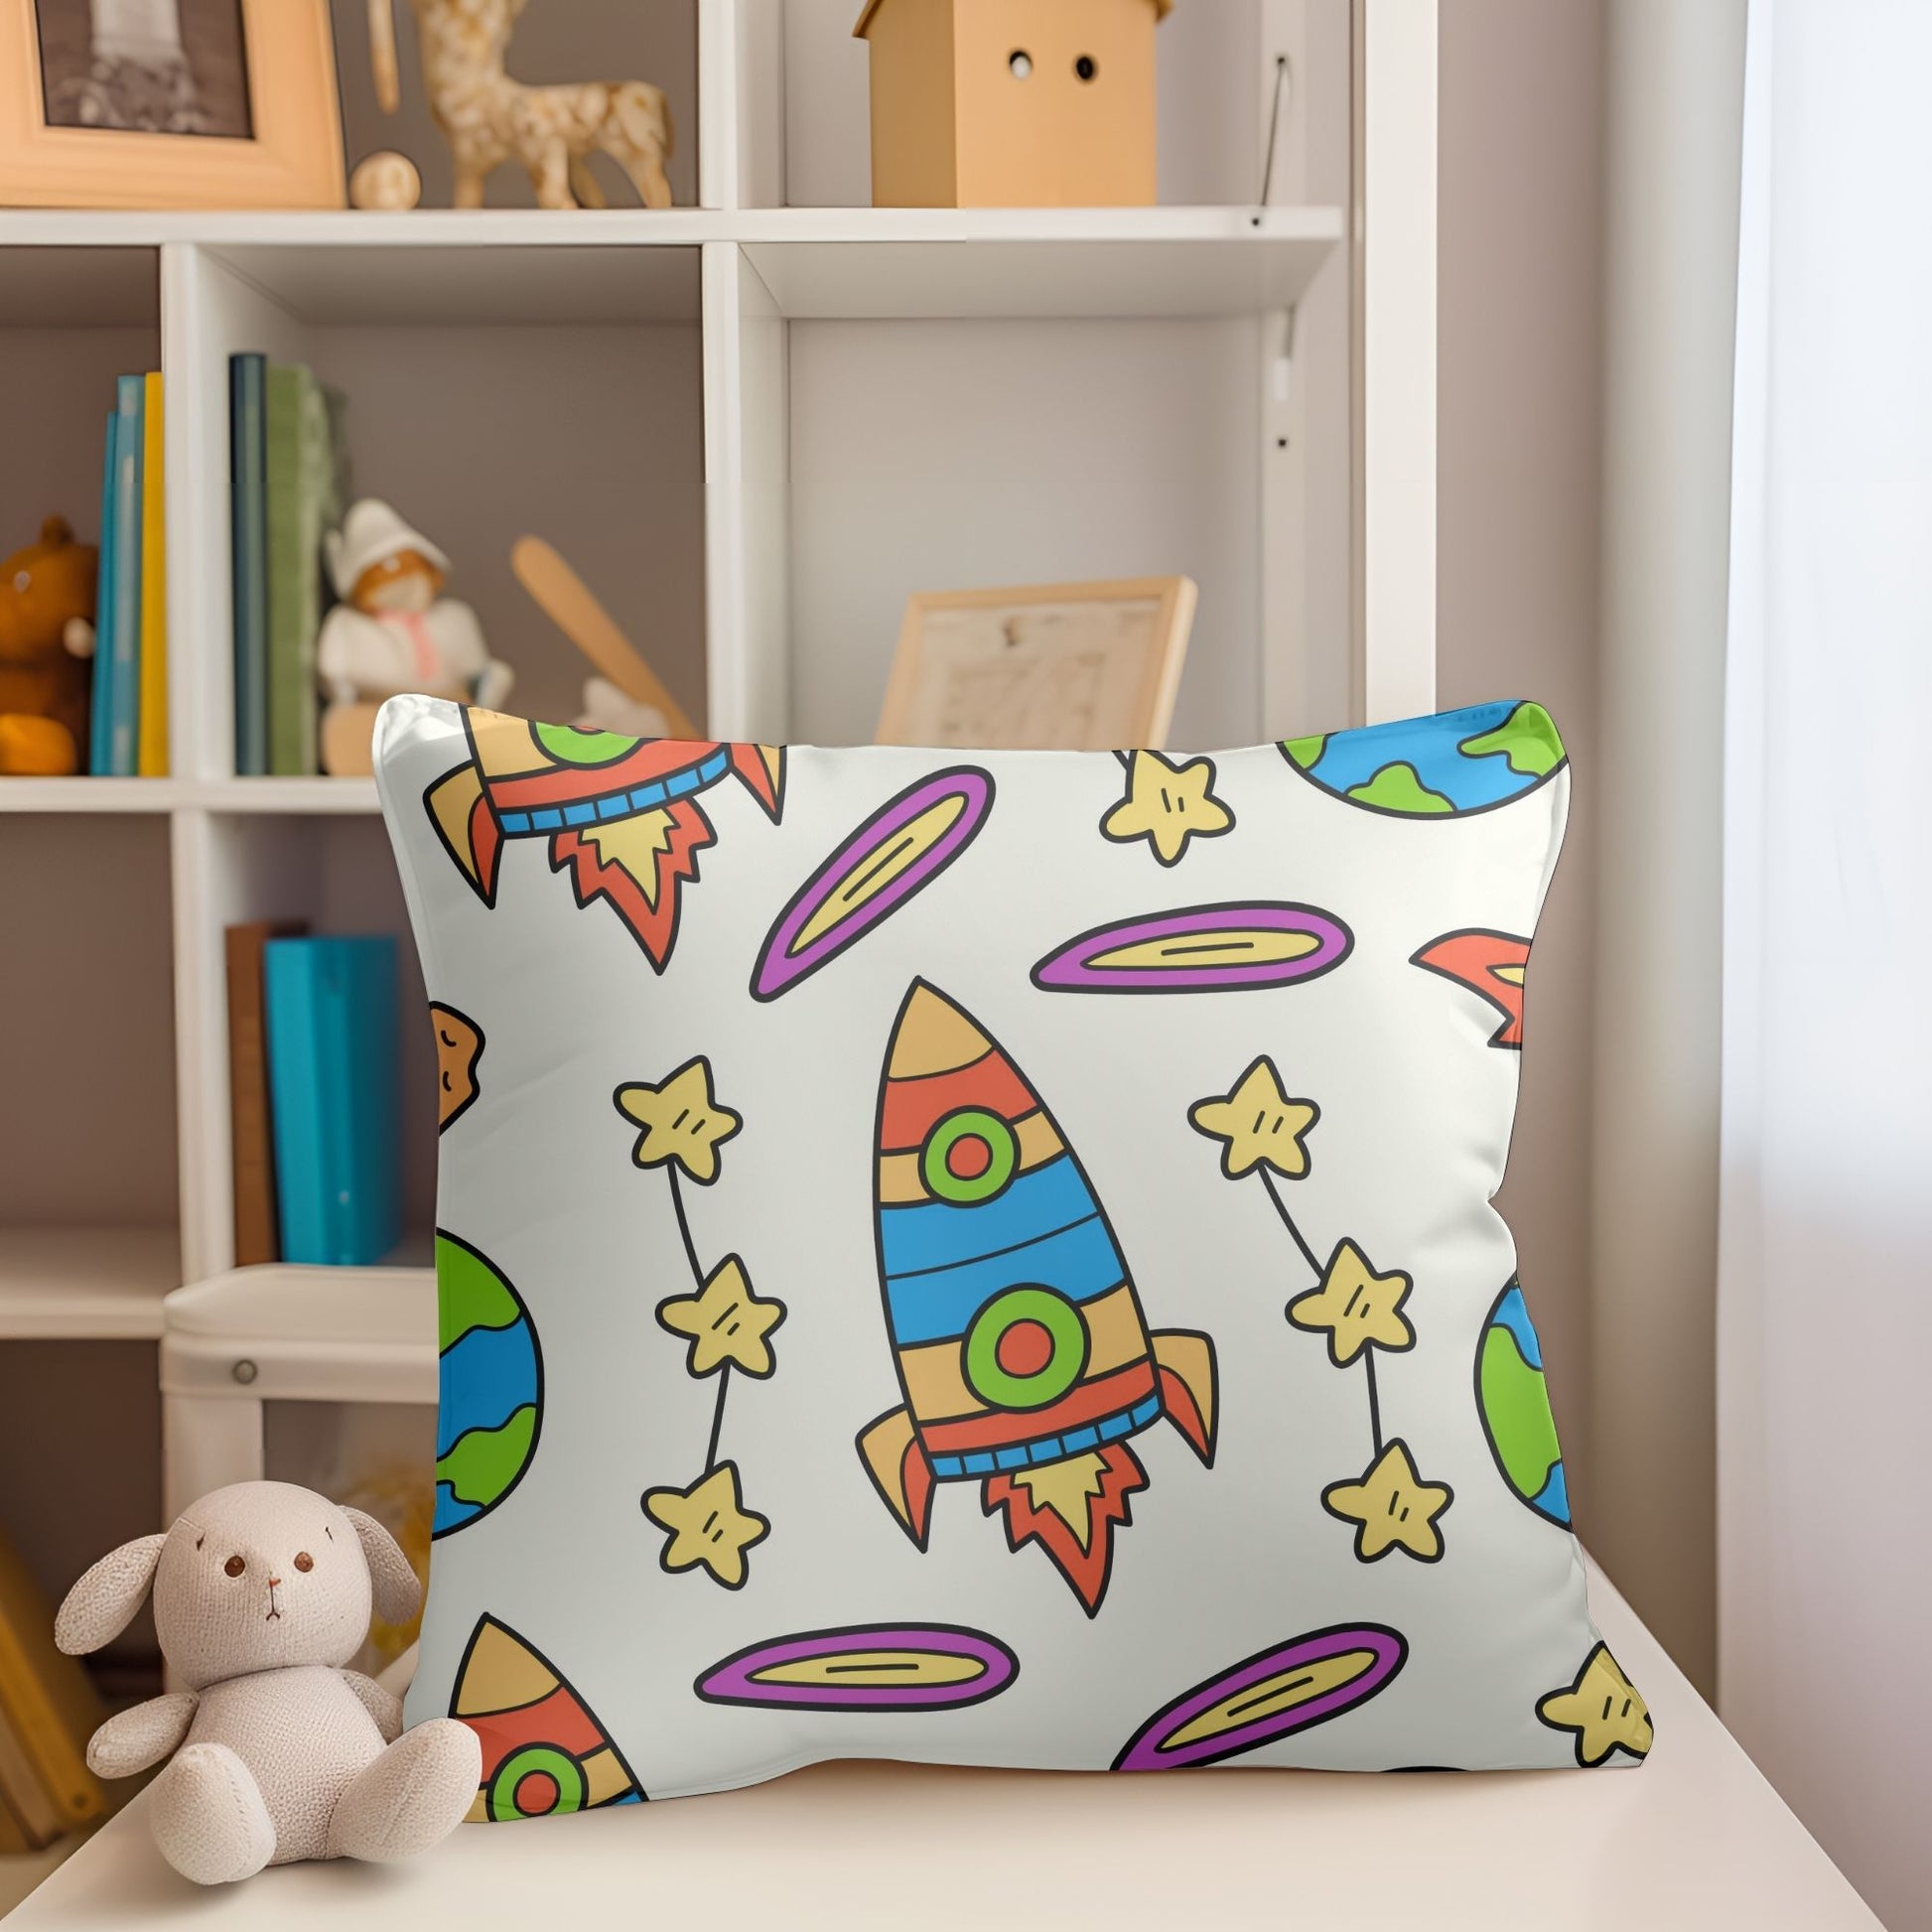 Whimsical space rocket pillow for a playful touch to any child's room.